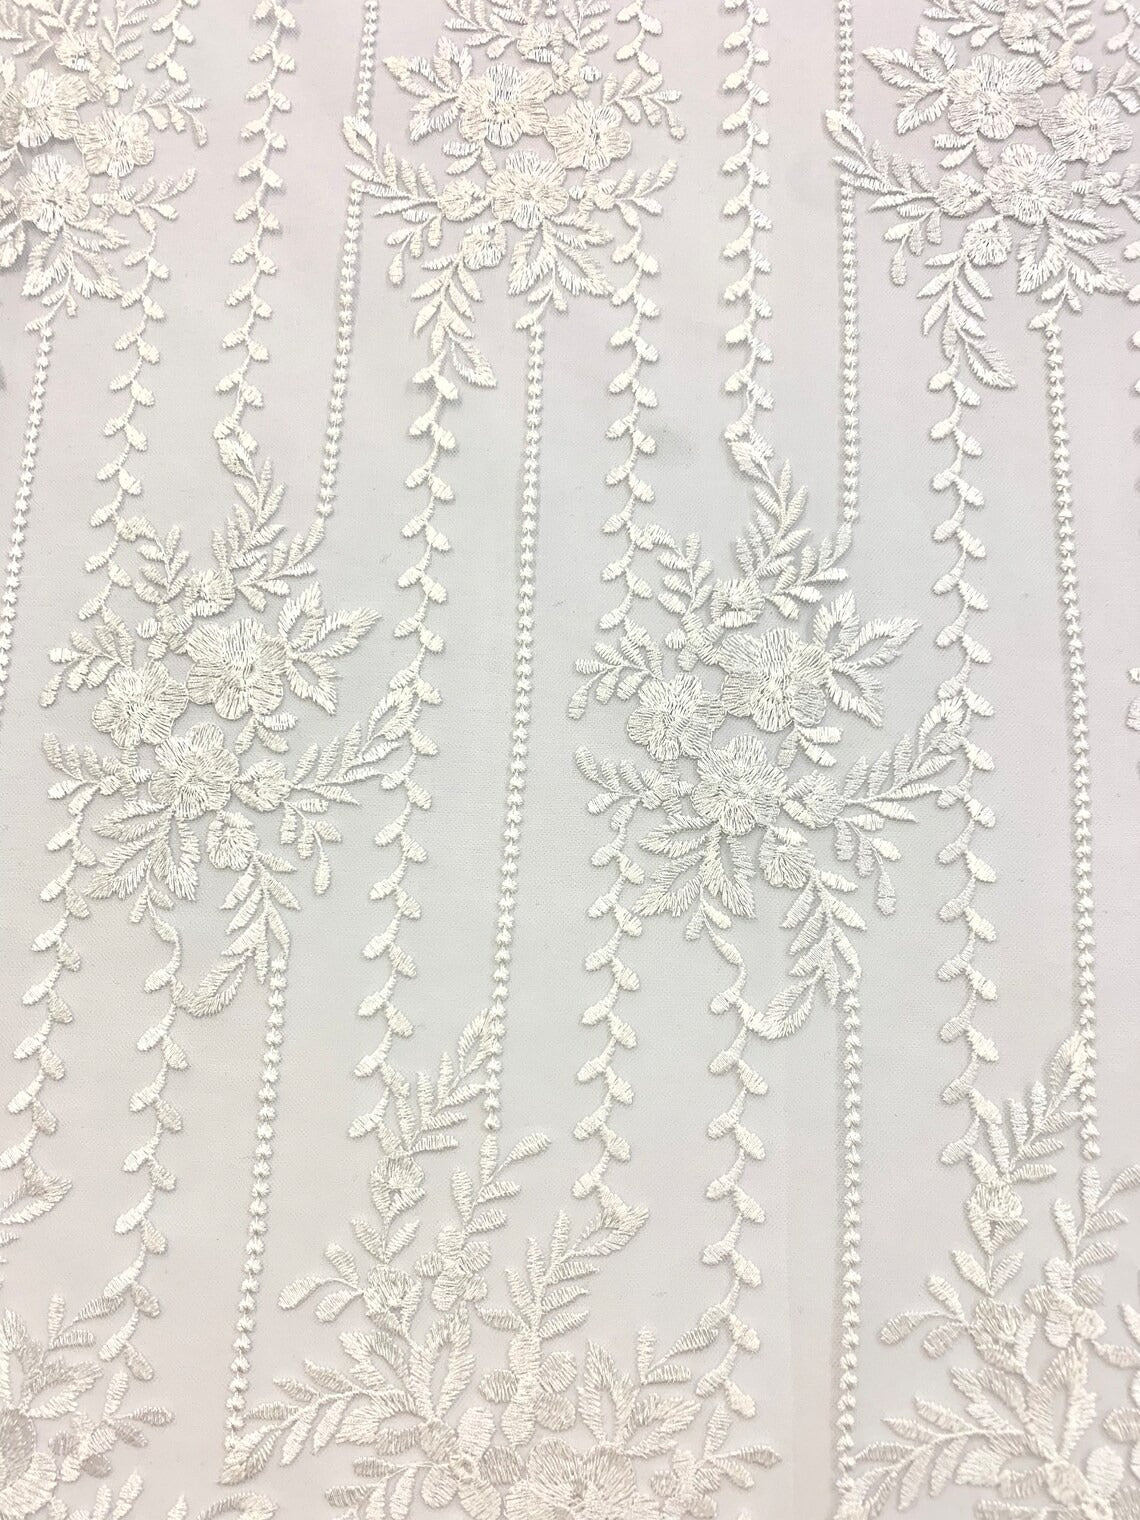 Flowers Floral White Lace Fabric / Embroidery Lace MeshICE FABRICSICE FABRICSBy The YardFlowers Floral White Lace Fabric / Embroidery Lace Mesh ICE FABRICS